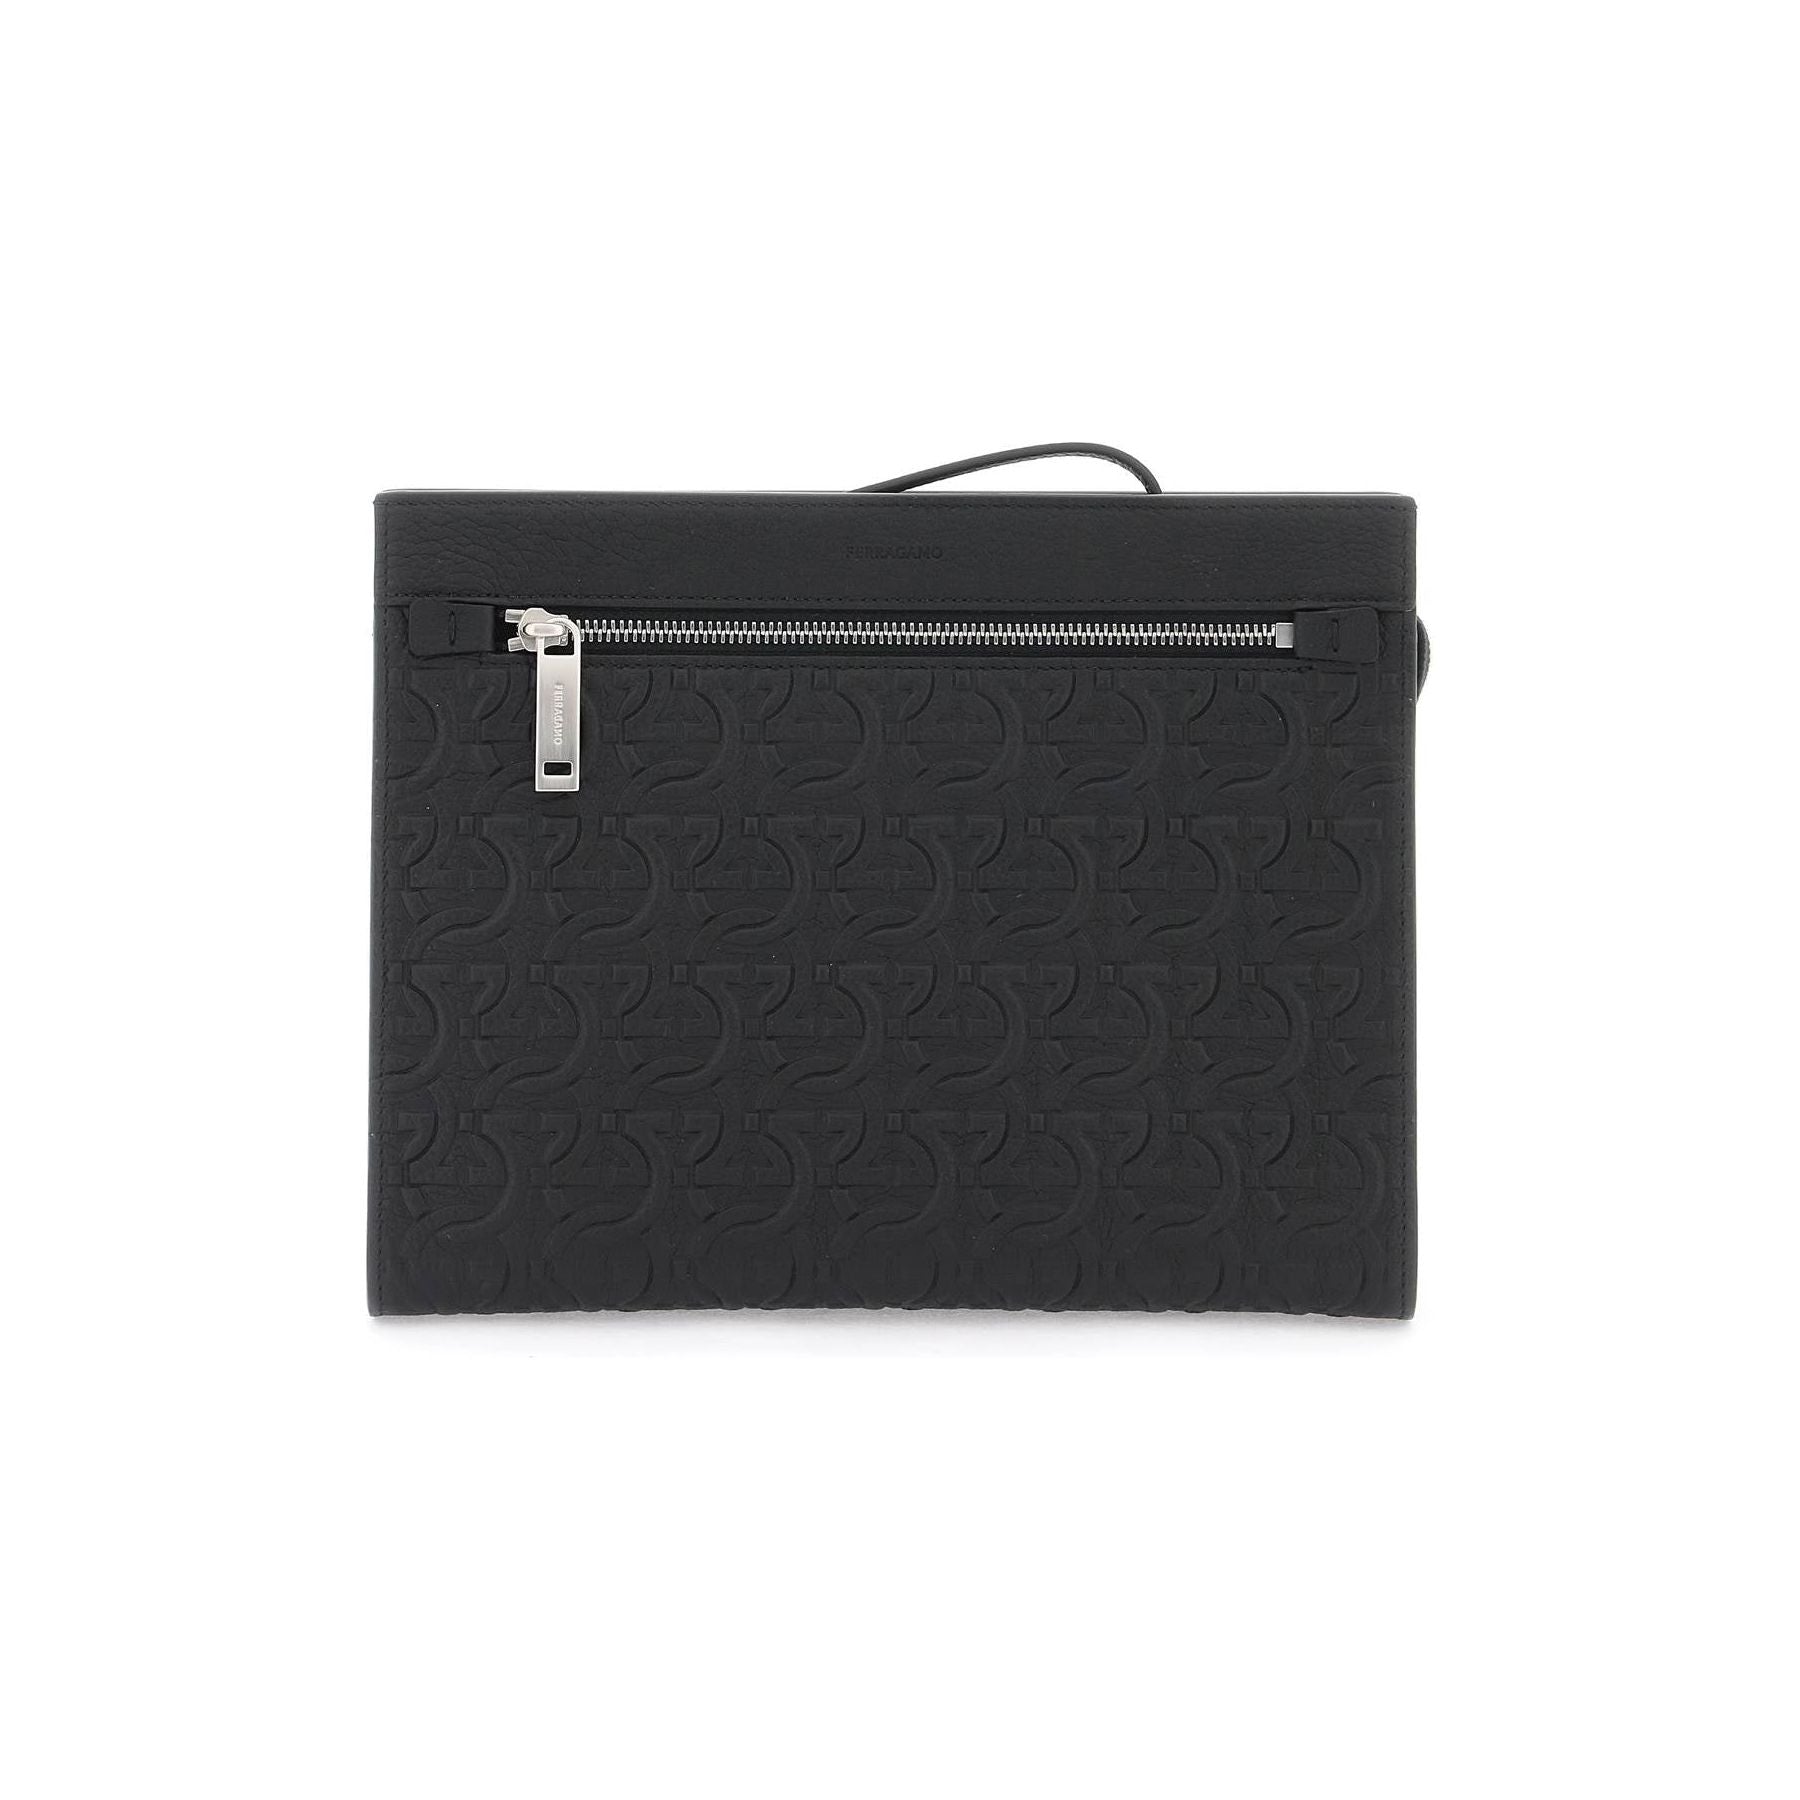 Gancini Embossed Leather Pouch